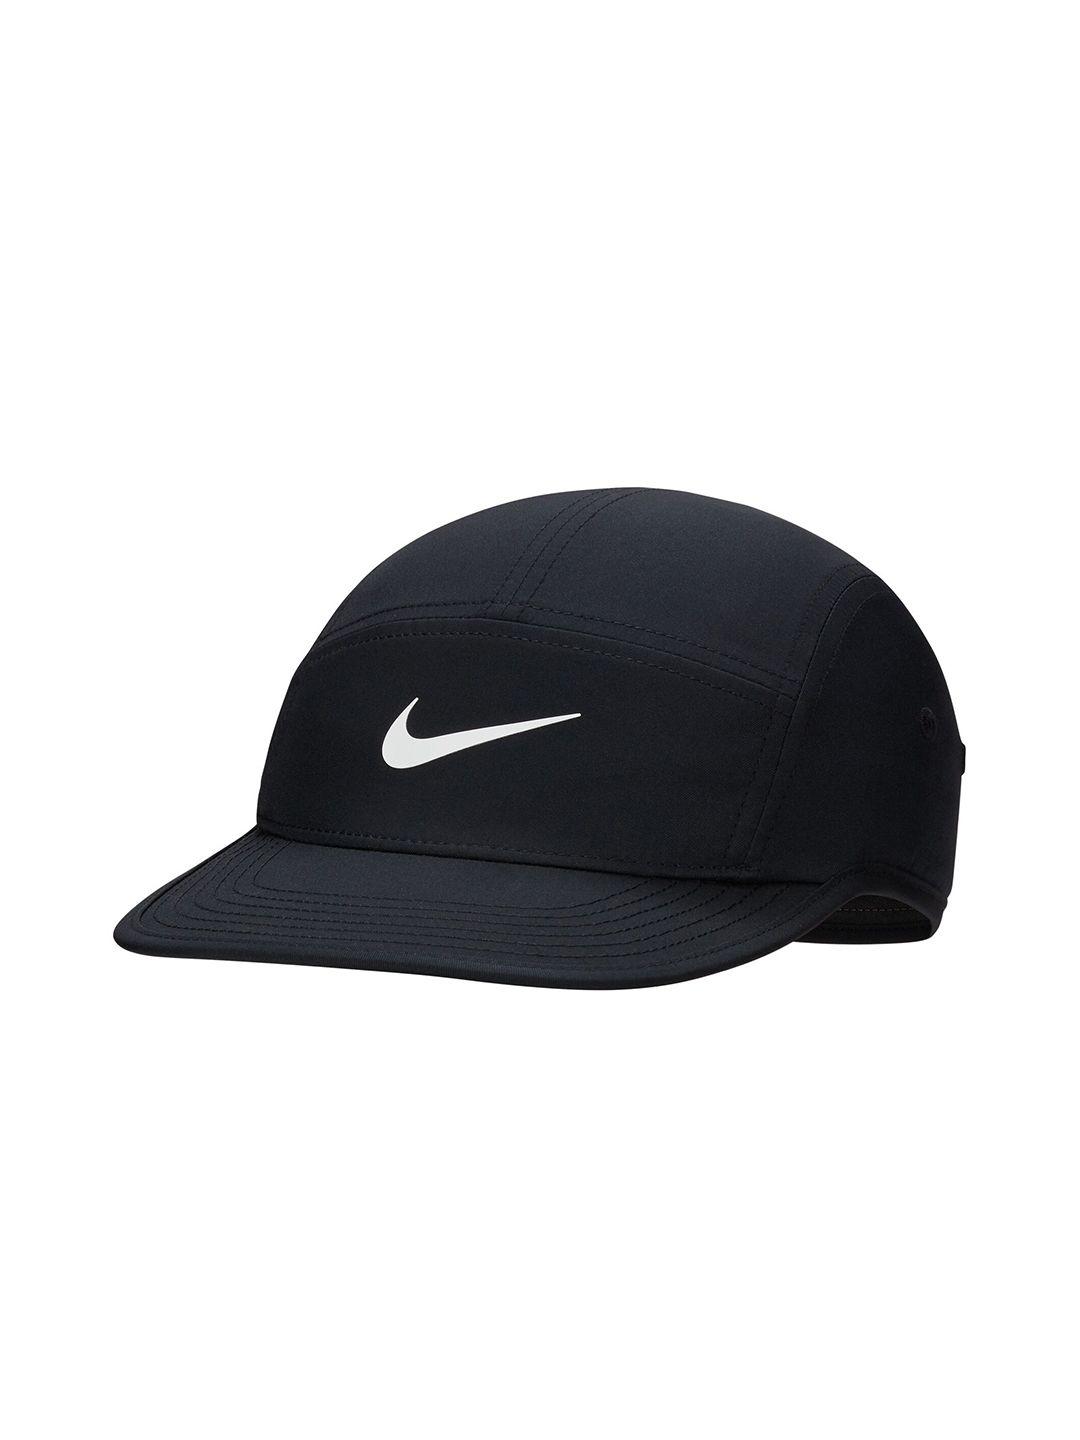 nike-dri-fit-fly-unstructured-swoosh-caps